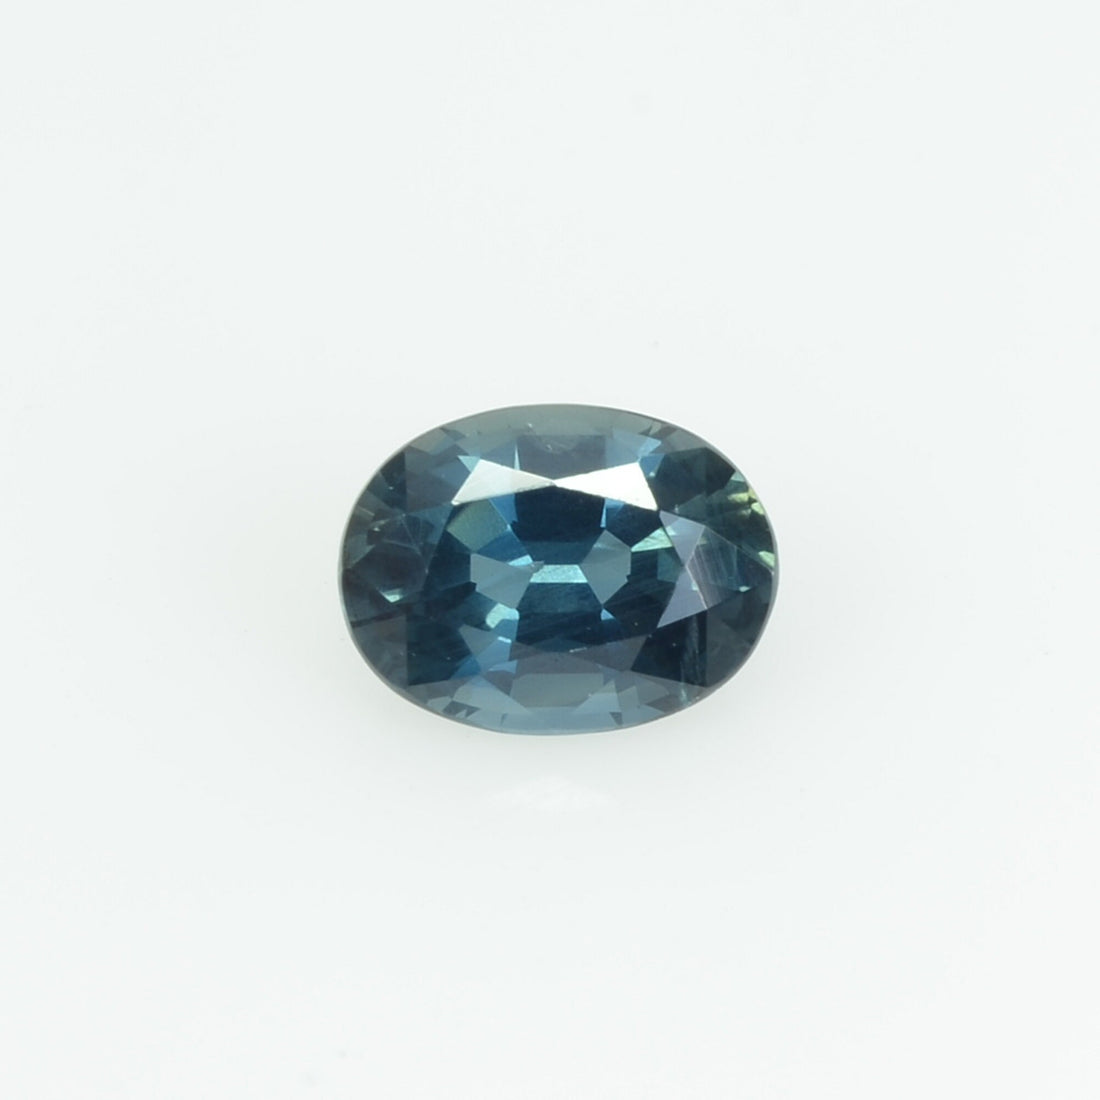 0.67 cts natural blue sapphire loose gemstone oval cut